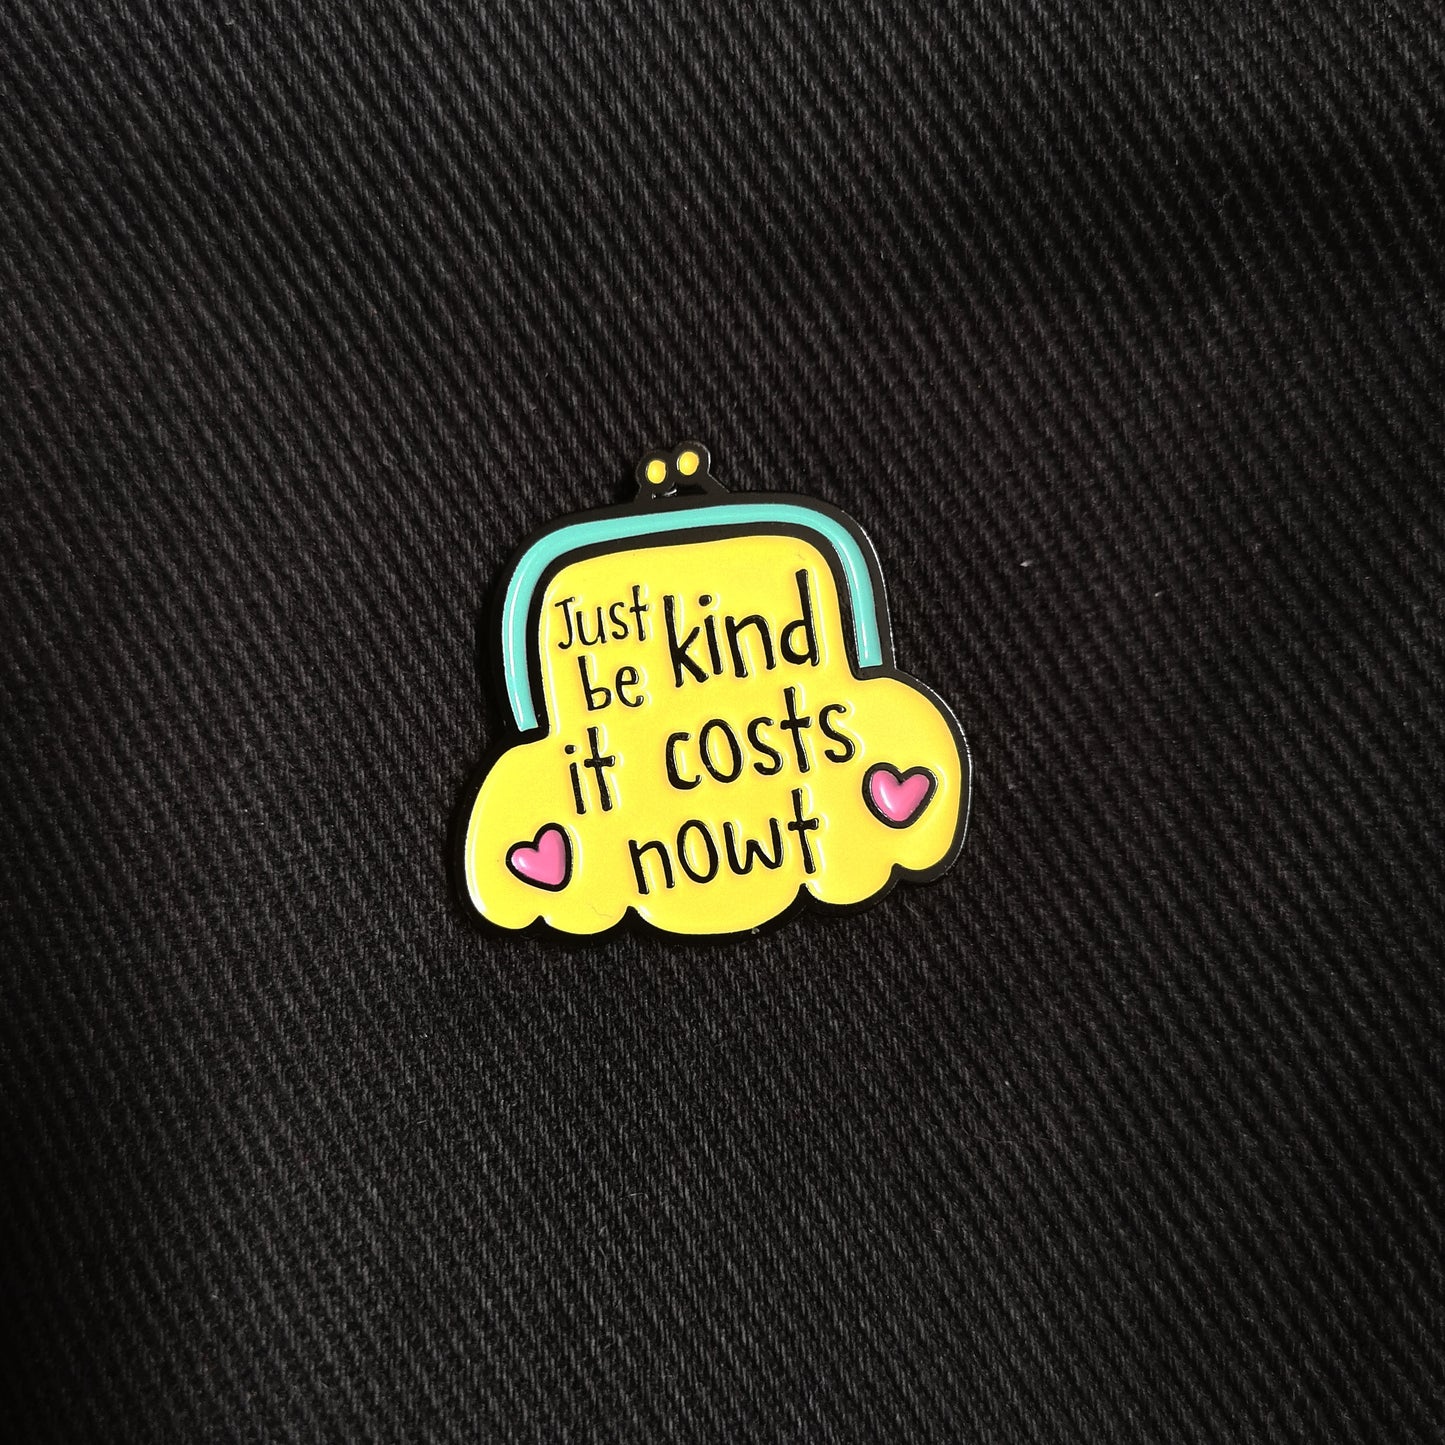 Just Be Kind It Costs Nothing - Enamel Pin